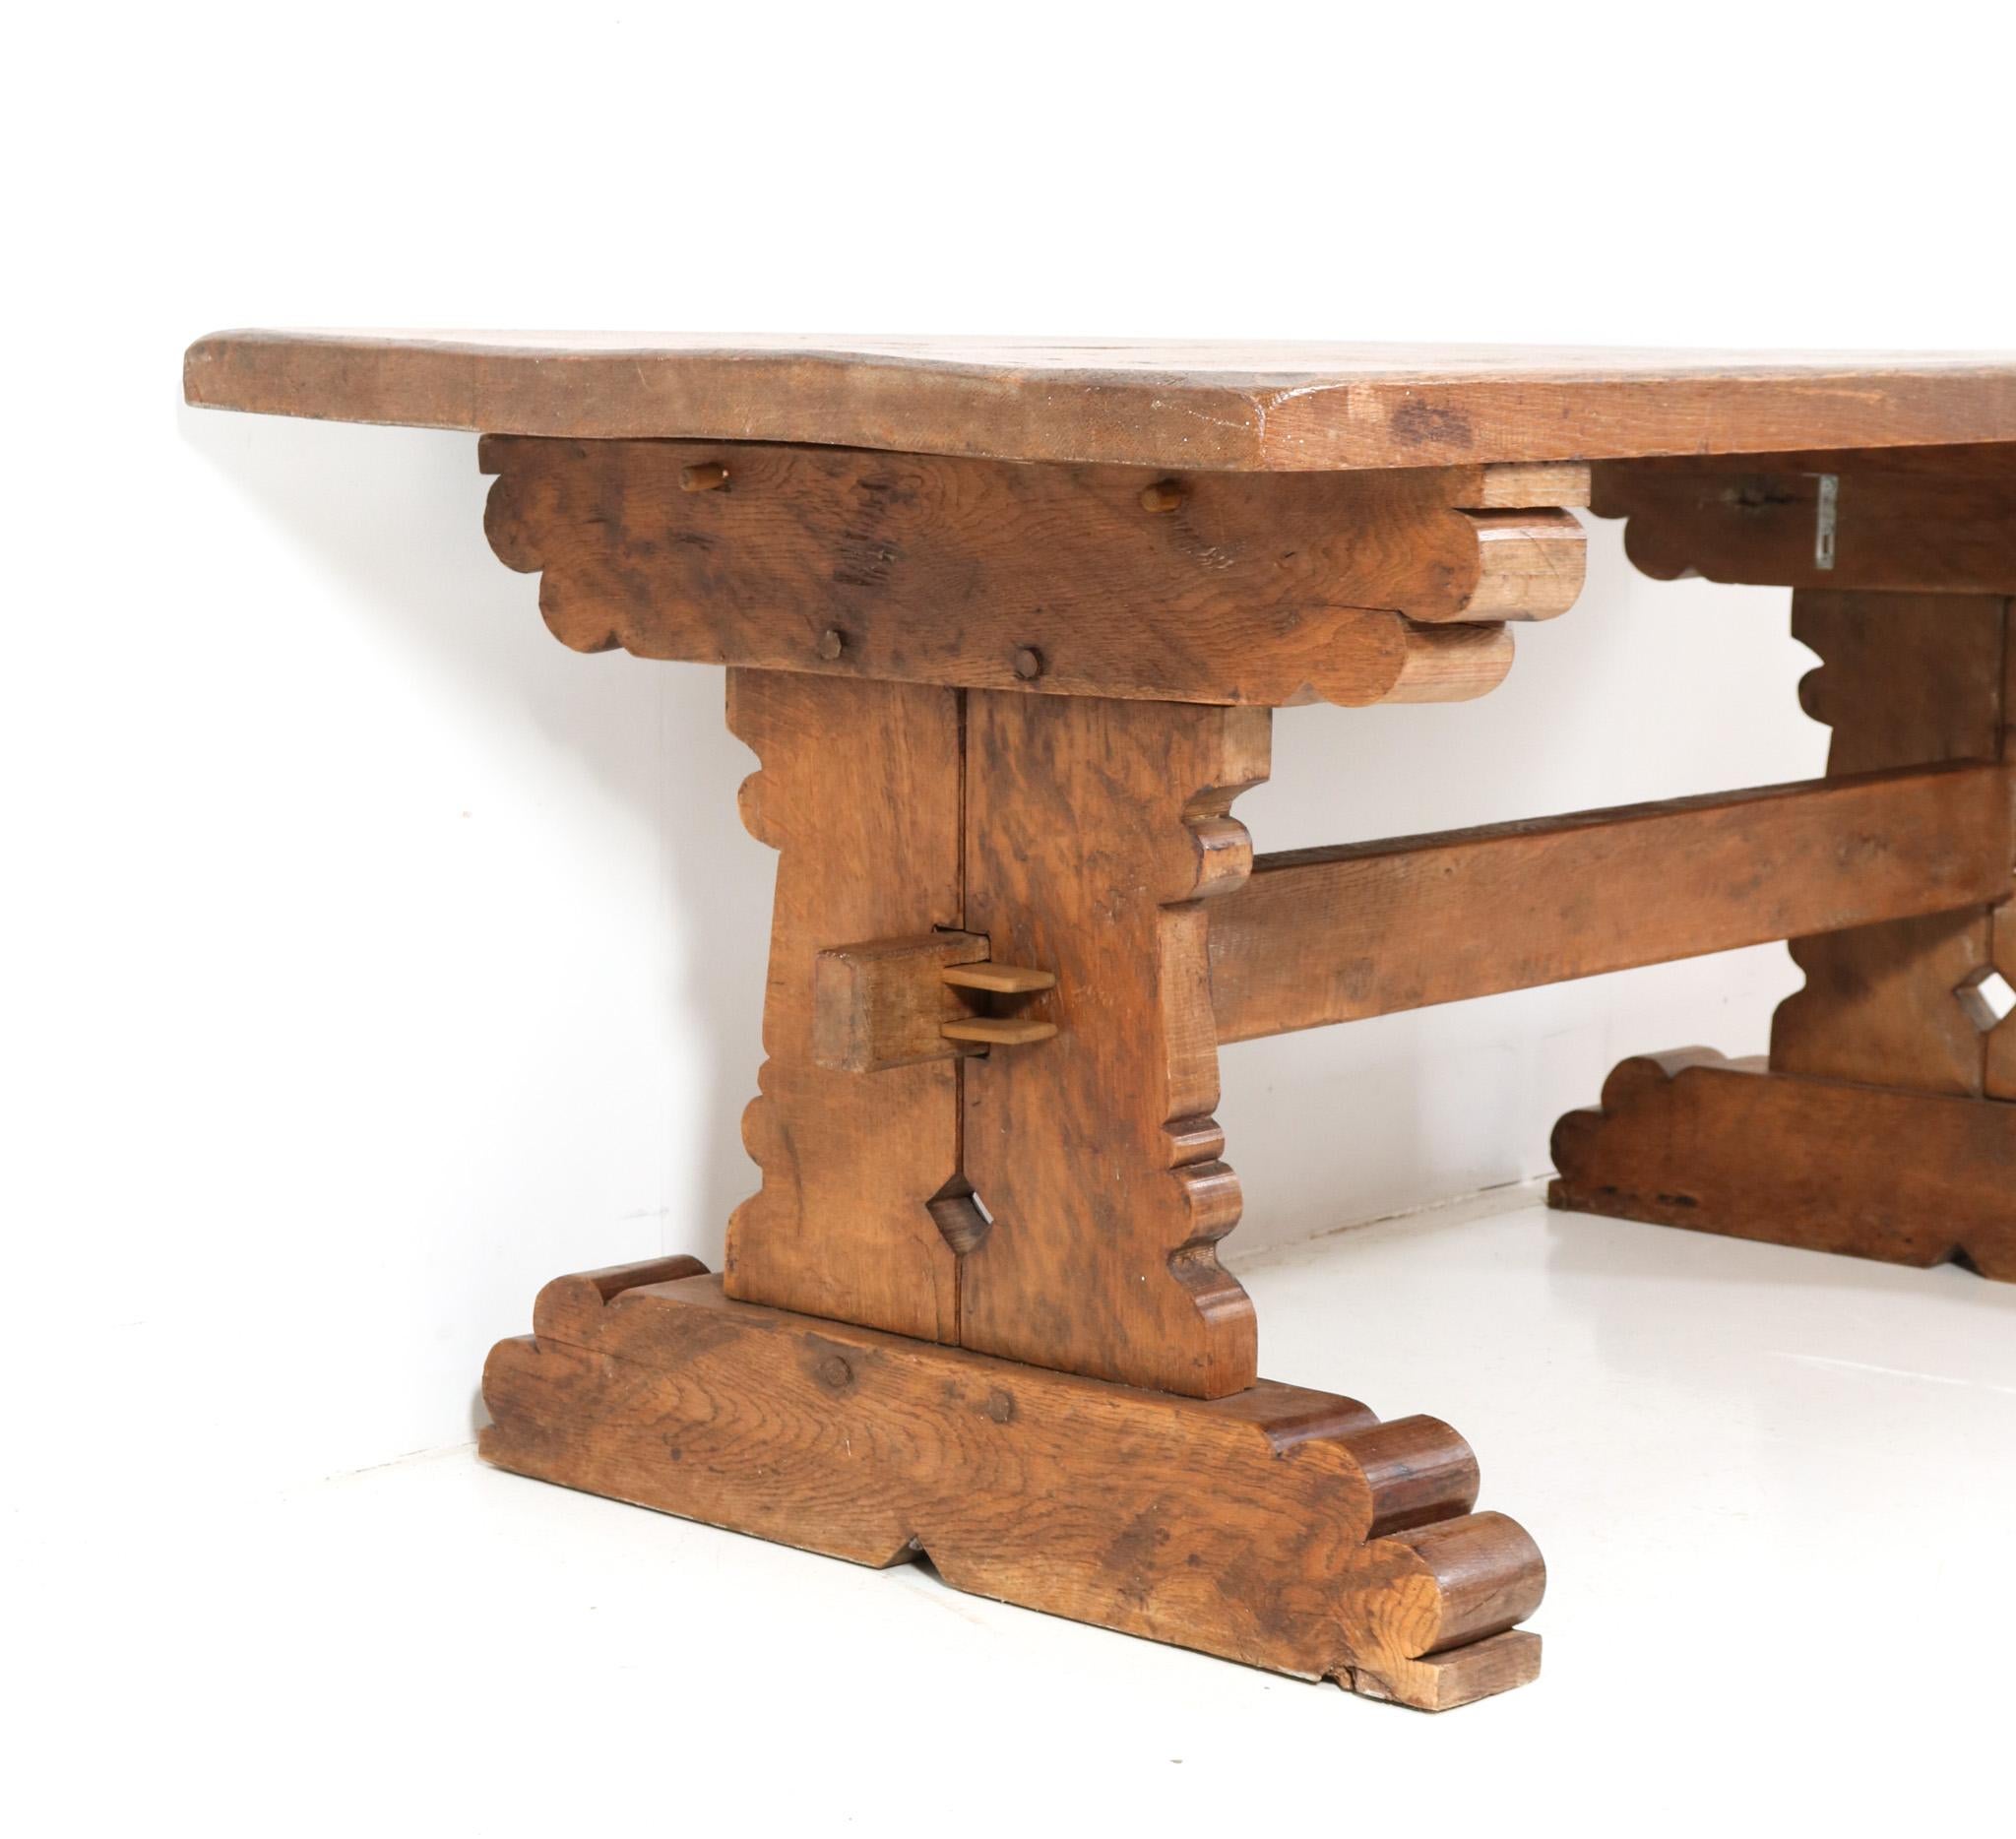 Oak Brutalist Dining Room Table or Refectory Table, 1970s For Sale 2